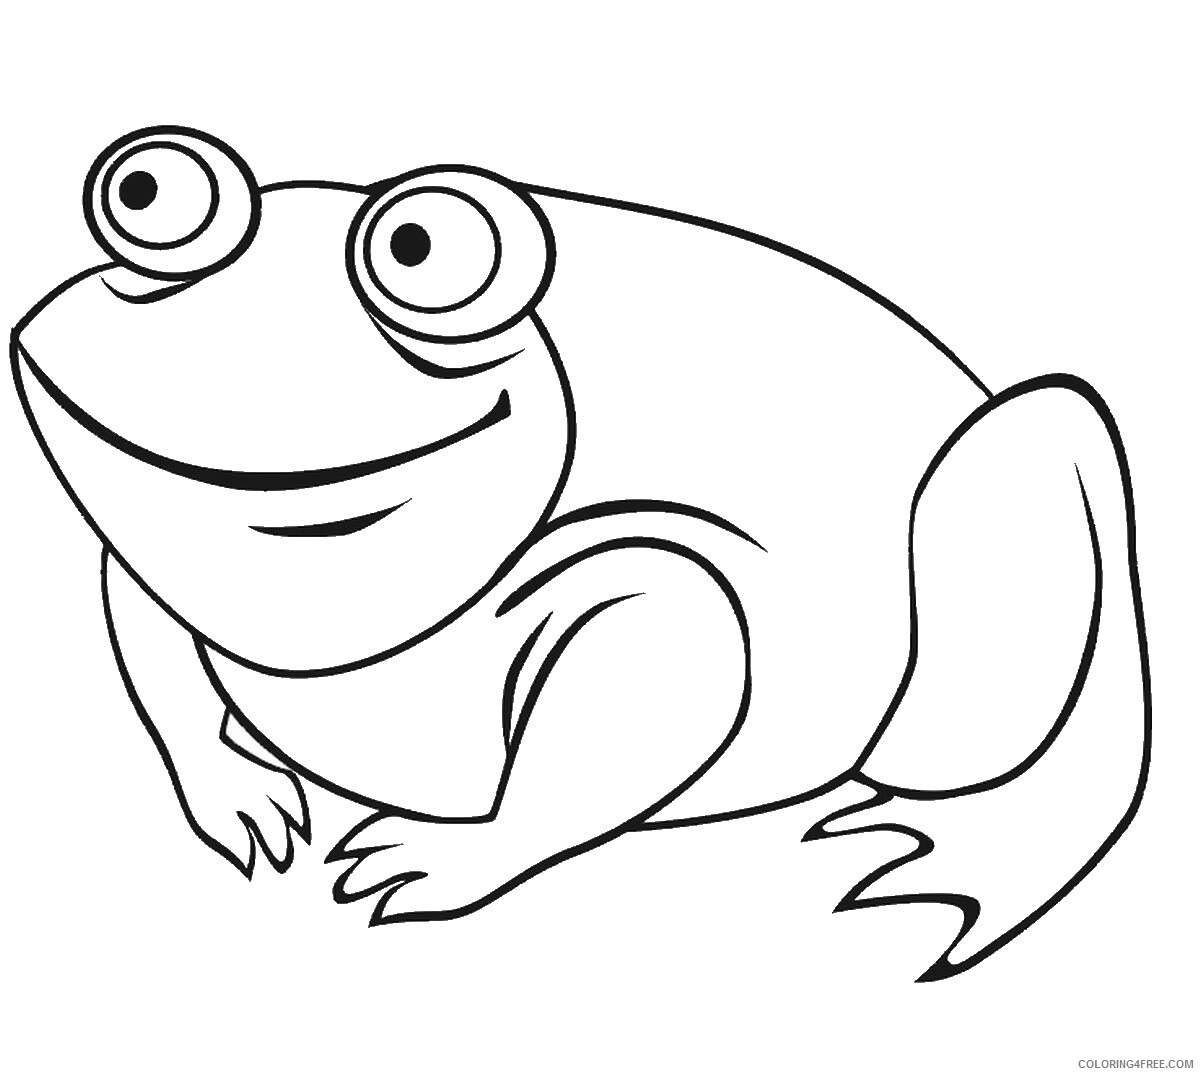 Frog Coloring Pages Animal Printable Sheets frog_cl_16 2021 2288 Coloring4free